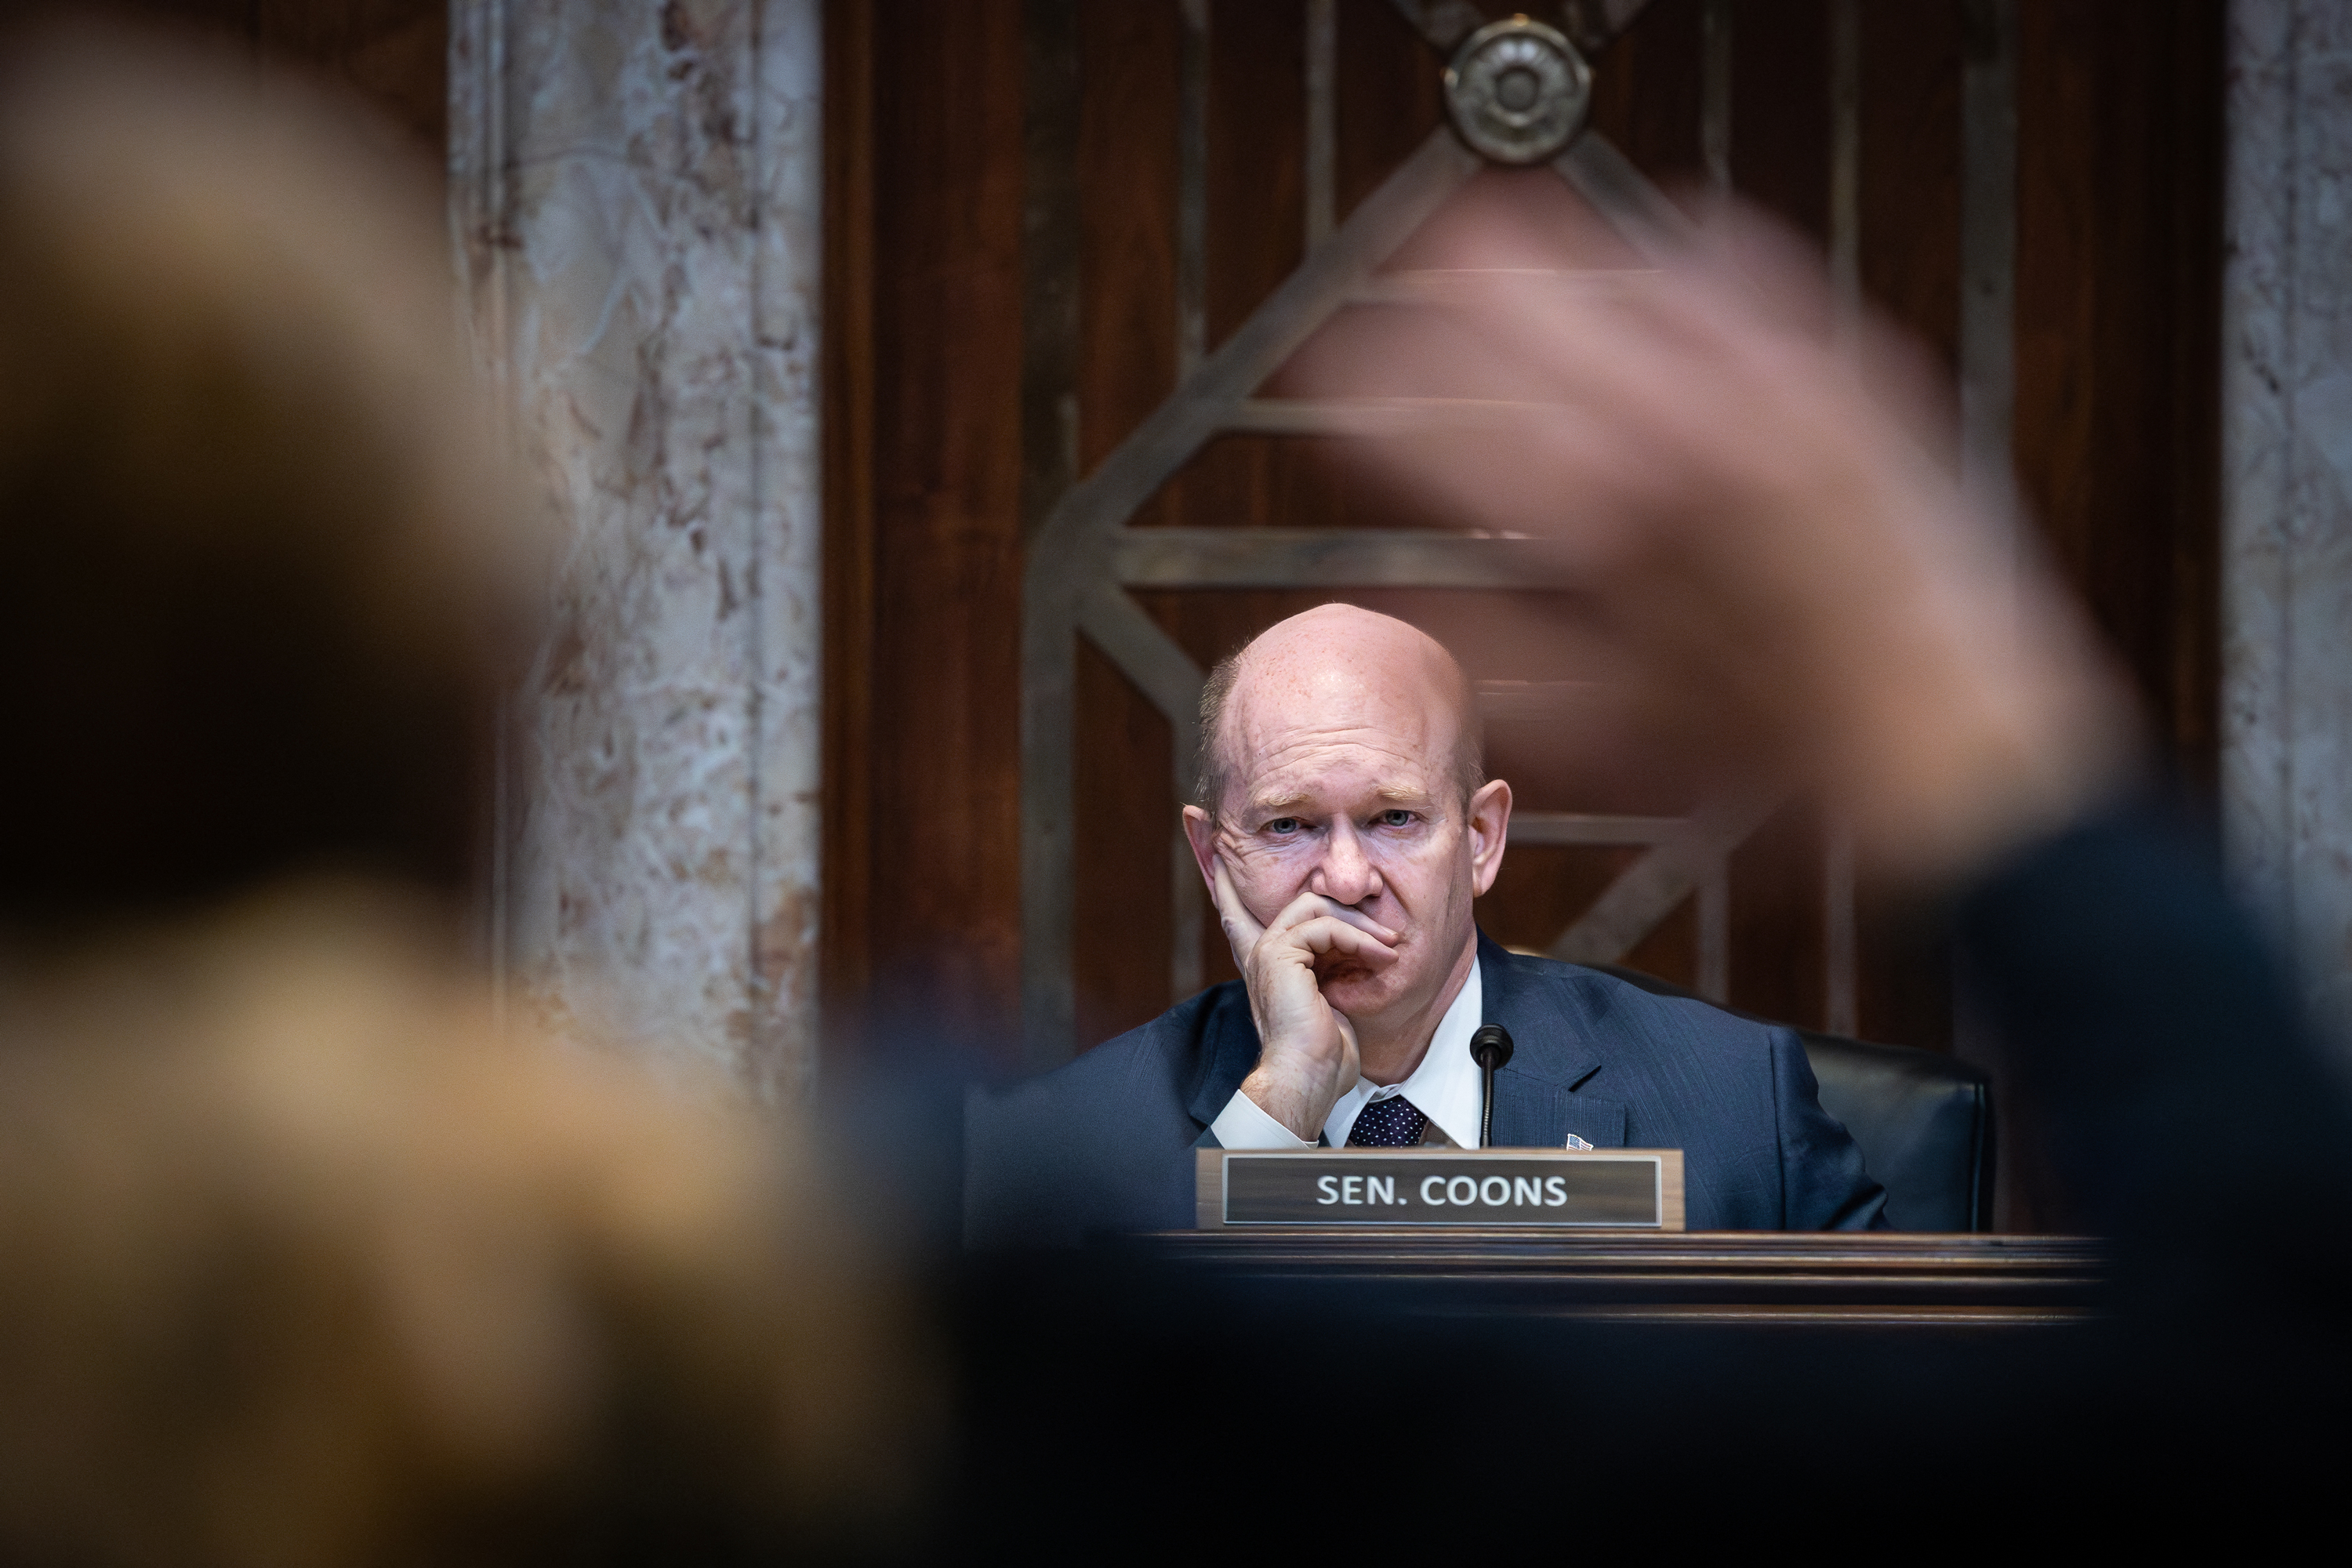 Sen. Chris Coons listens at a Senate Appropriations Committee Hearing in Washington, DC, on April 9.